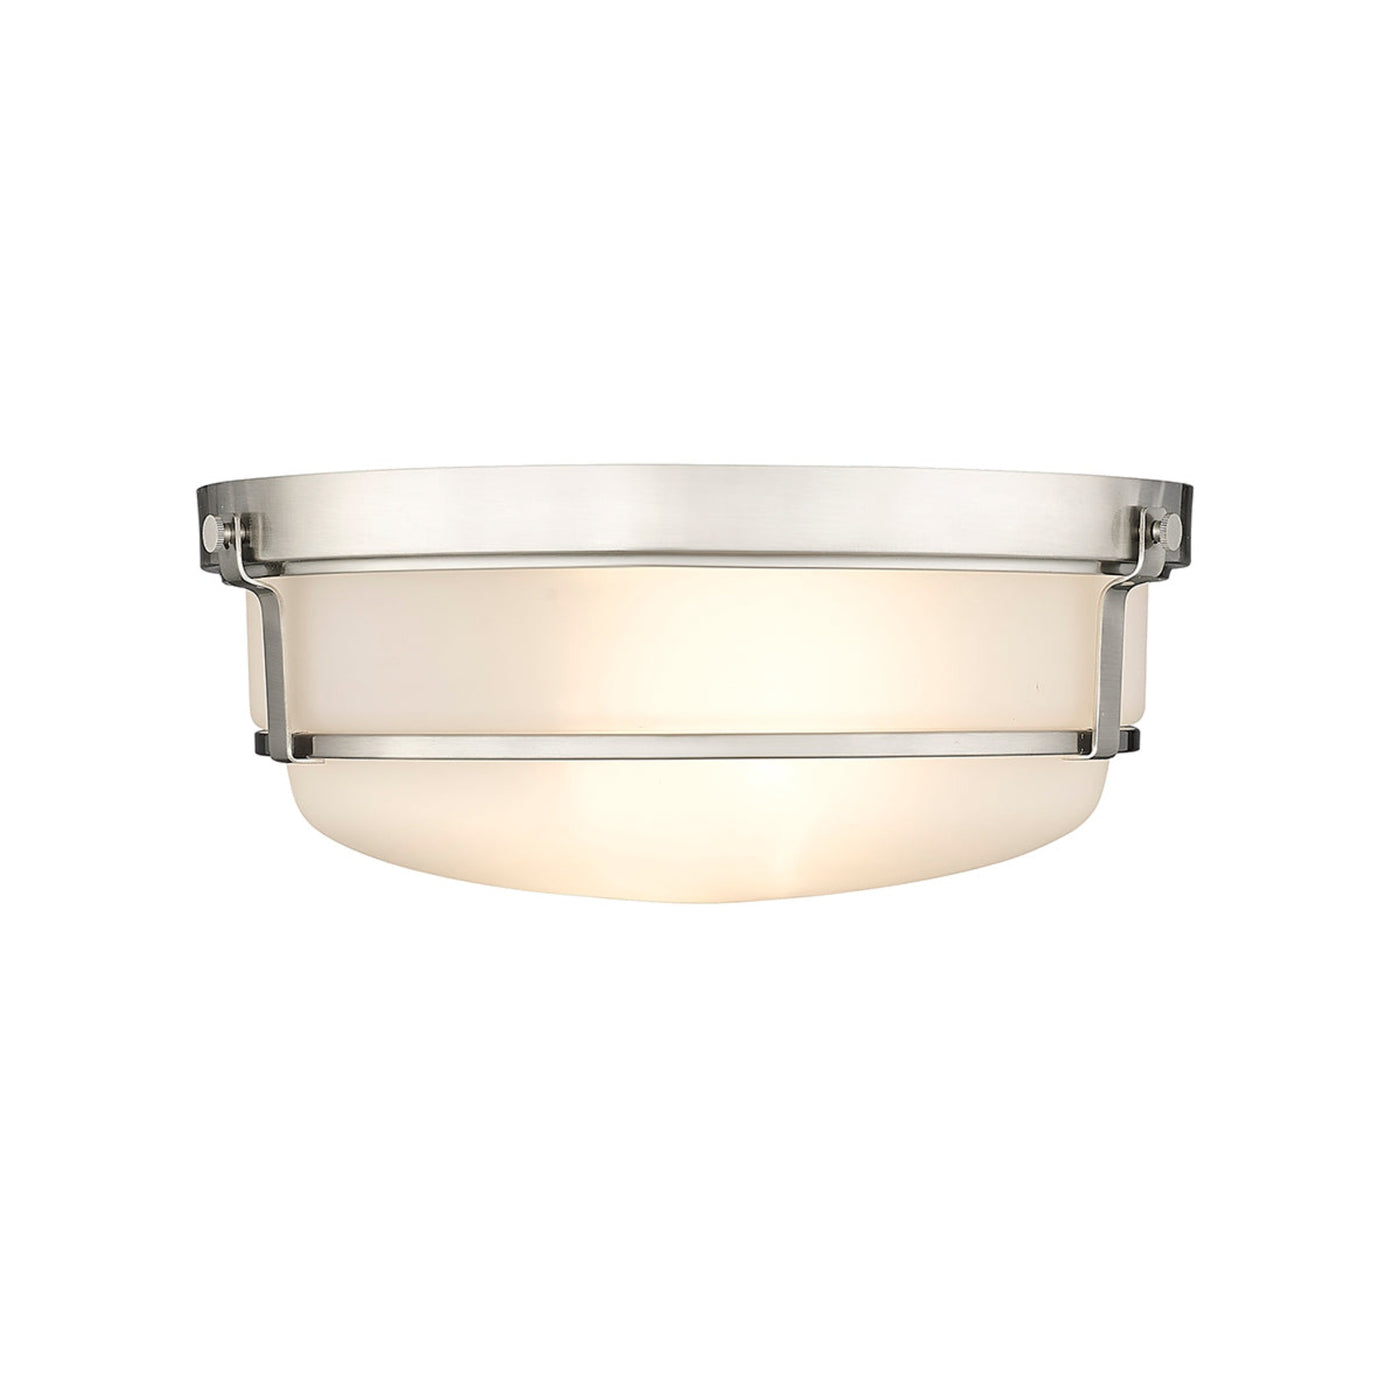 Millennium Lighting Two Light Flush Mount Ceiling Light, Arlson Collection, (Available in Brushed Nickel or Matte Black Finish)